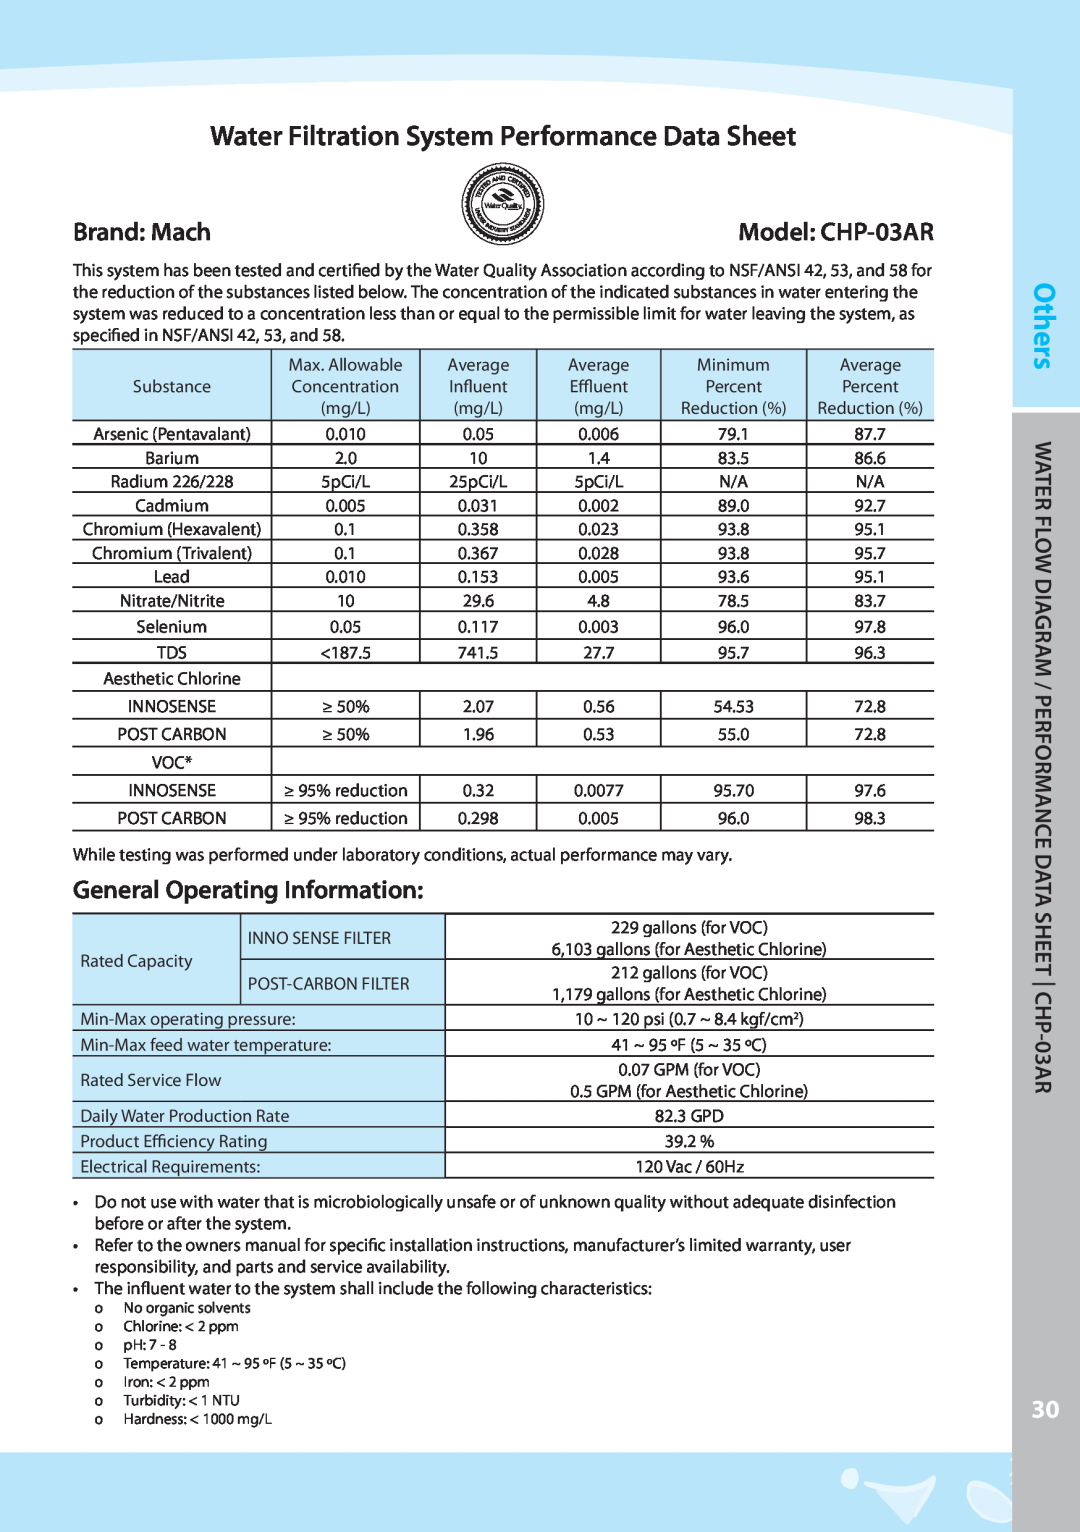 Coway Water Filtration System Performance Data Sheet, Brand: Mach, General Operating Information, Model: CHP-03AR 